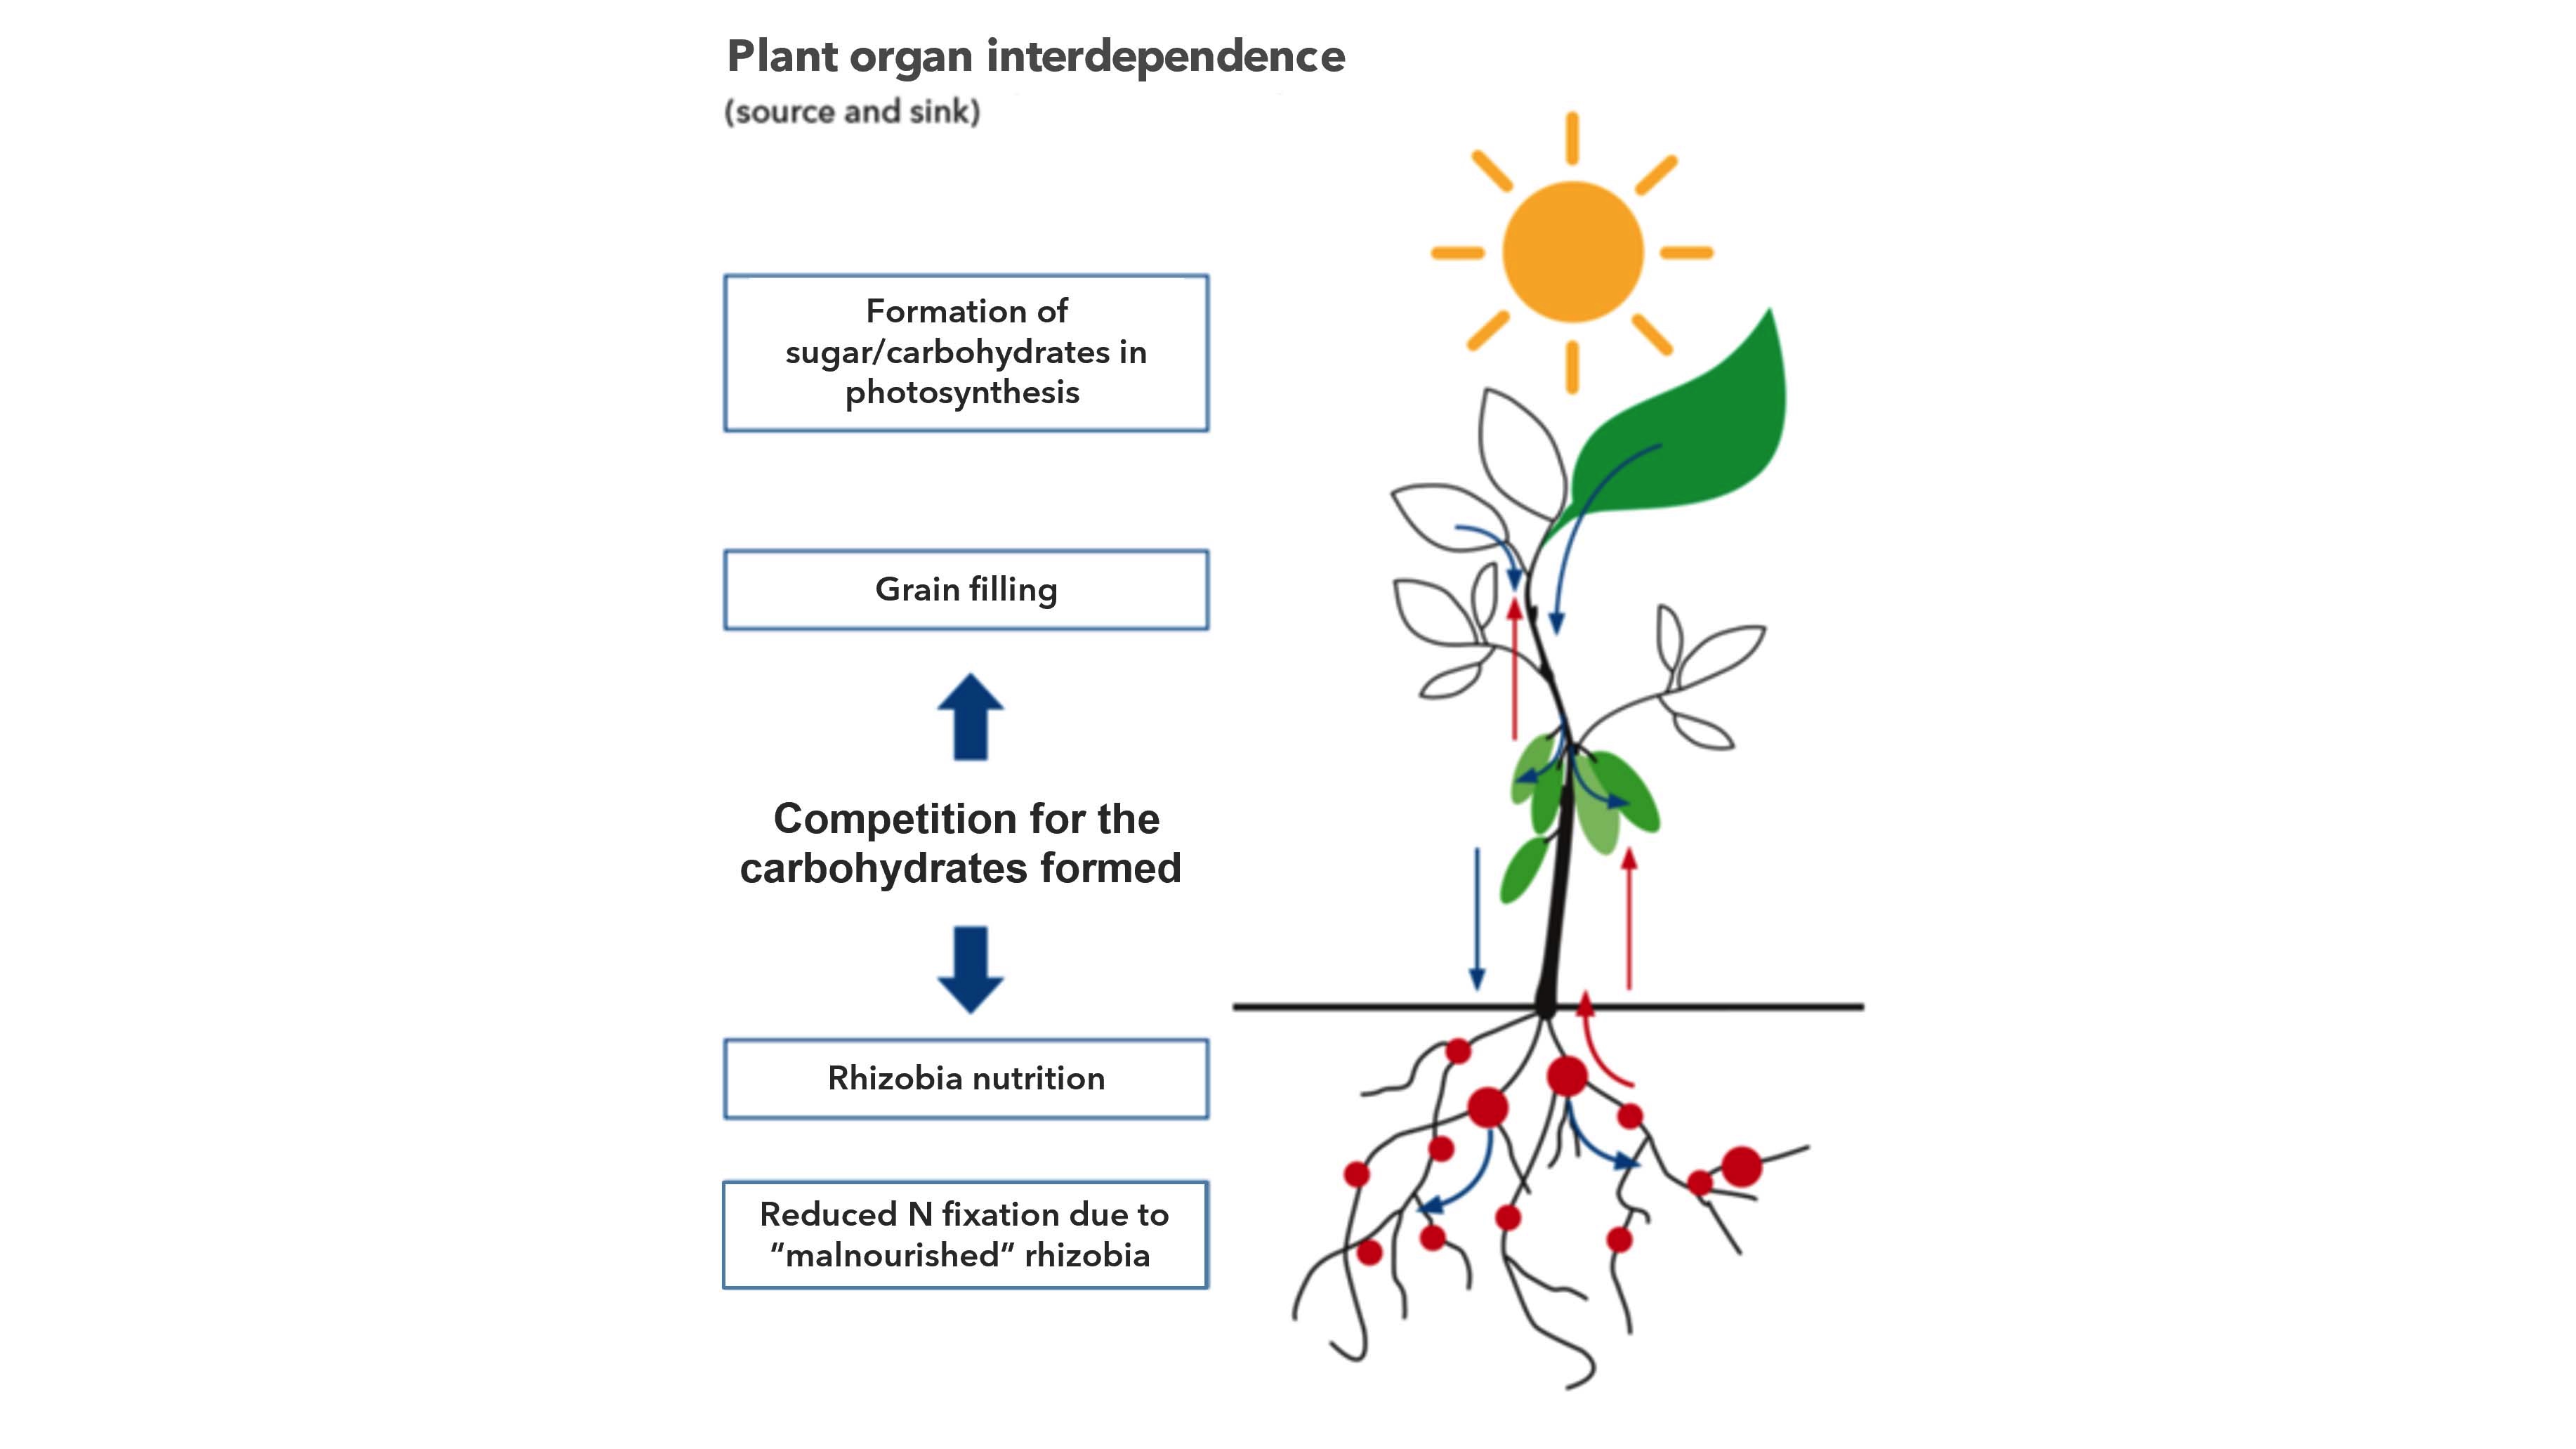 Soy plant organ interdependence